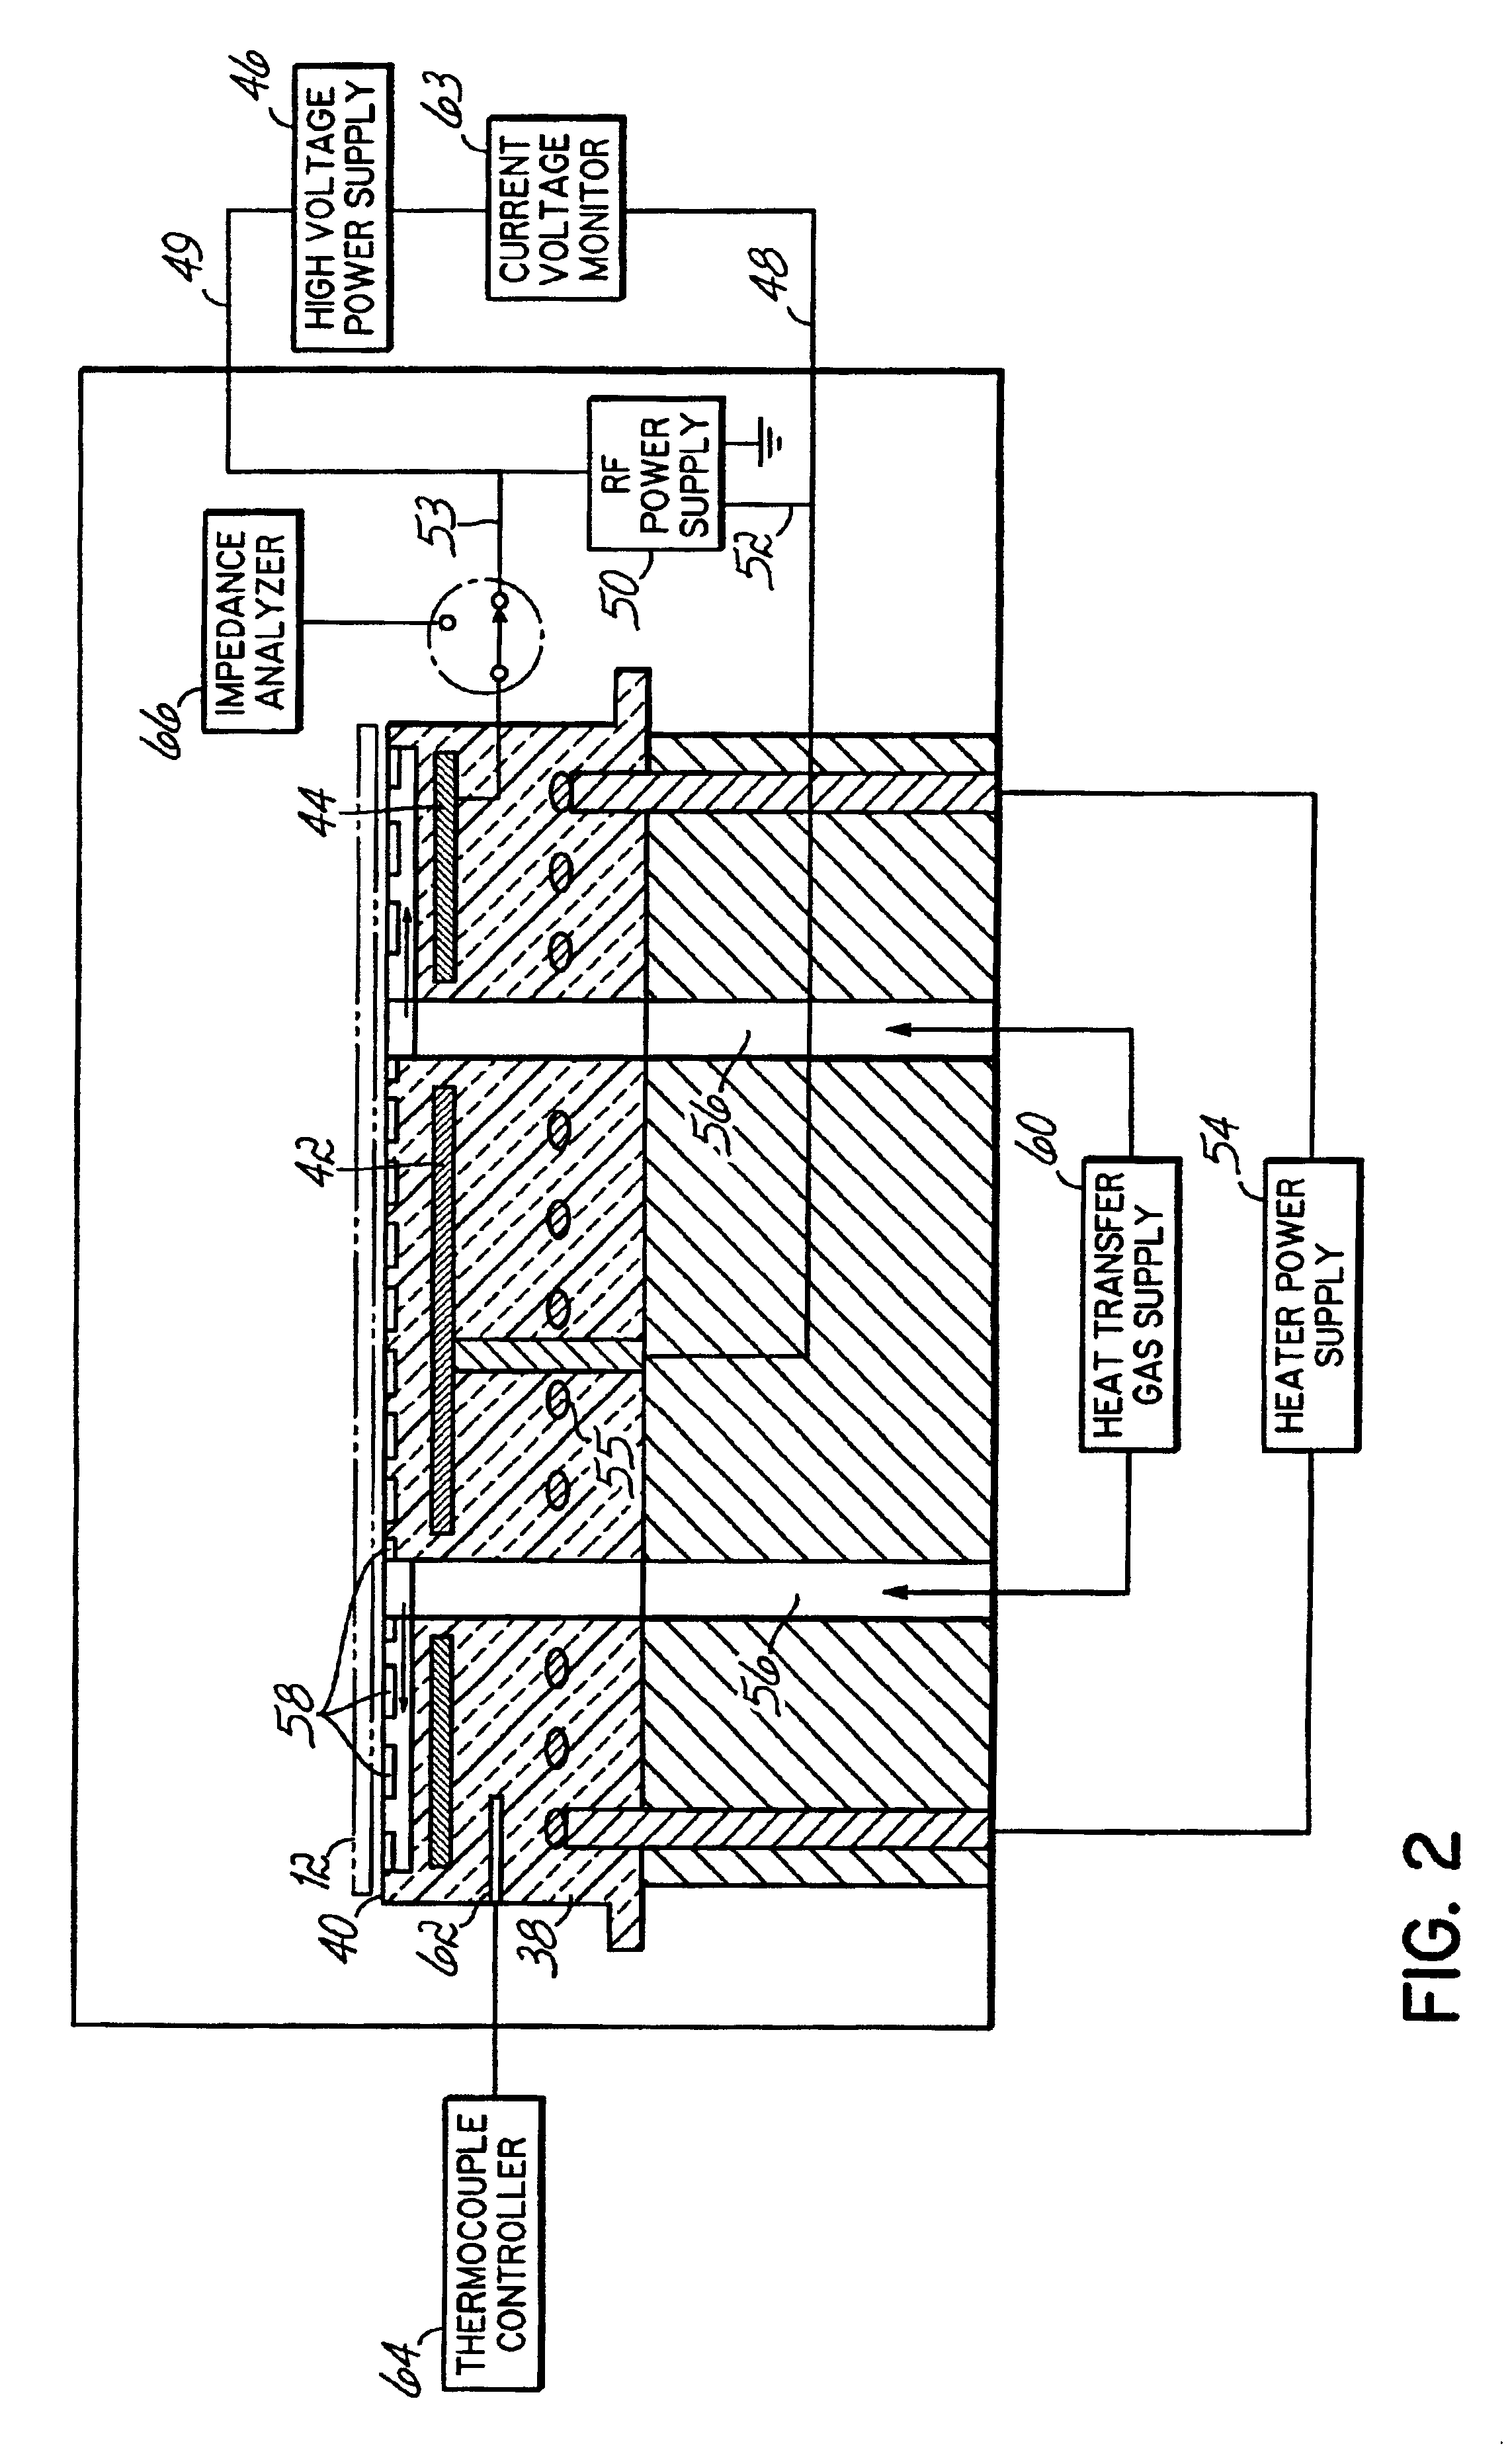 Method for characterizing the performance of an electrostatic chuck